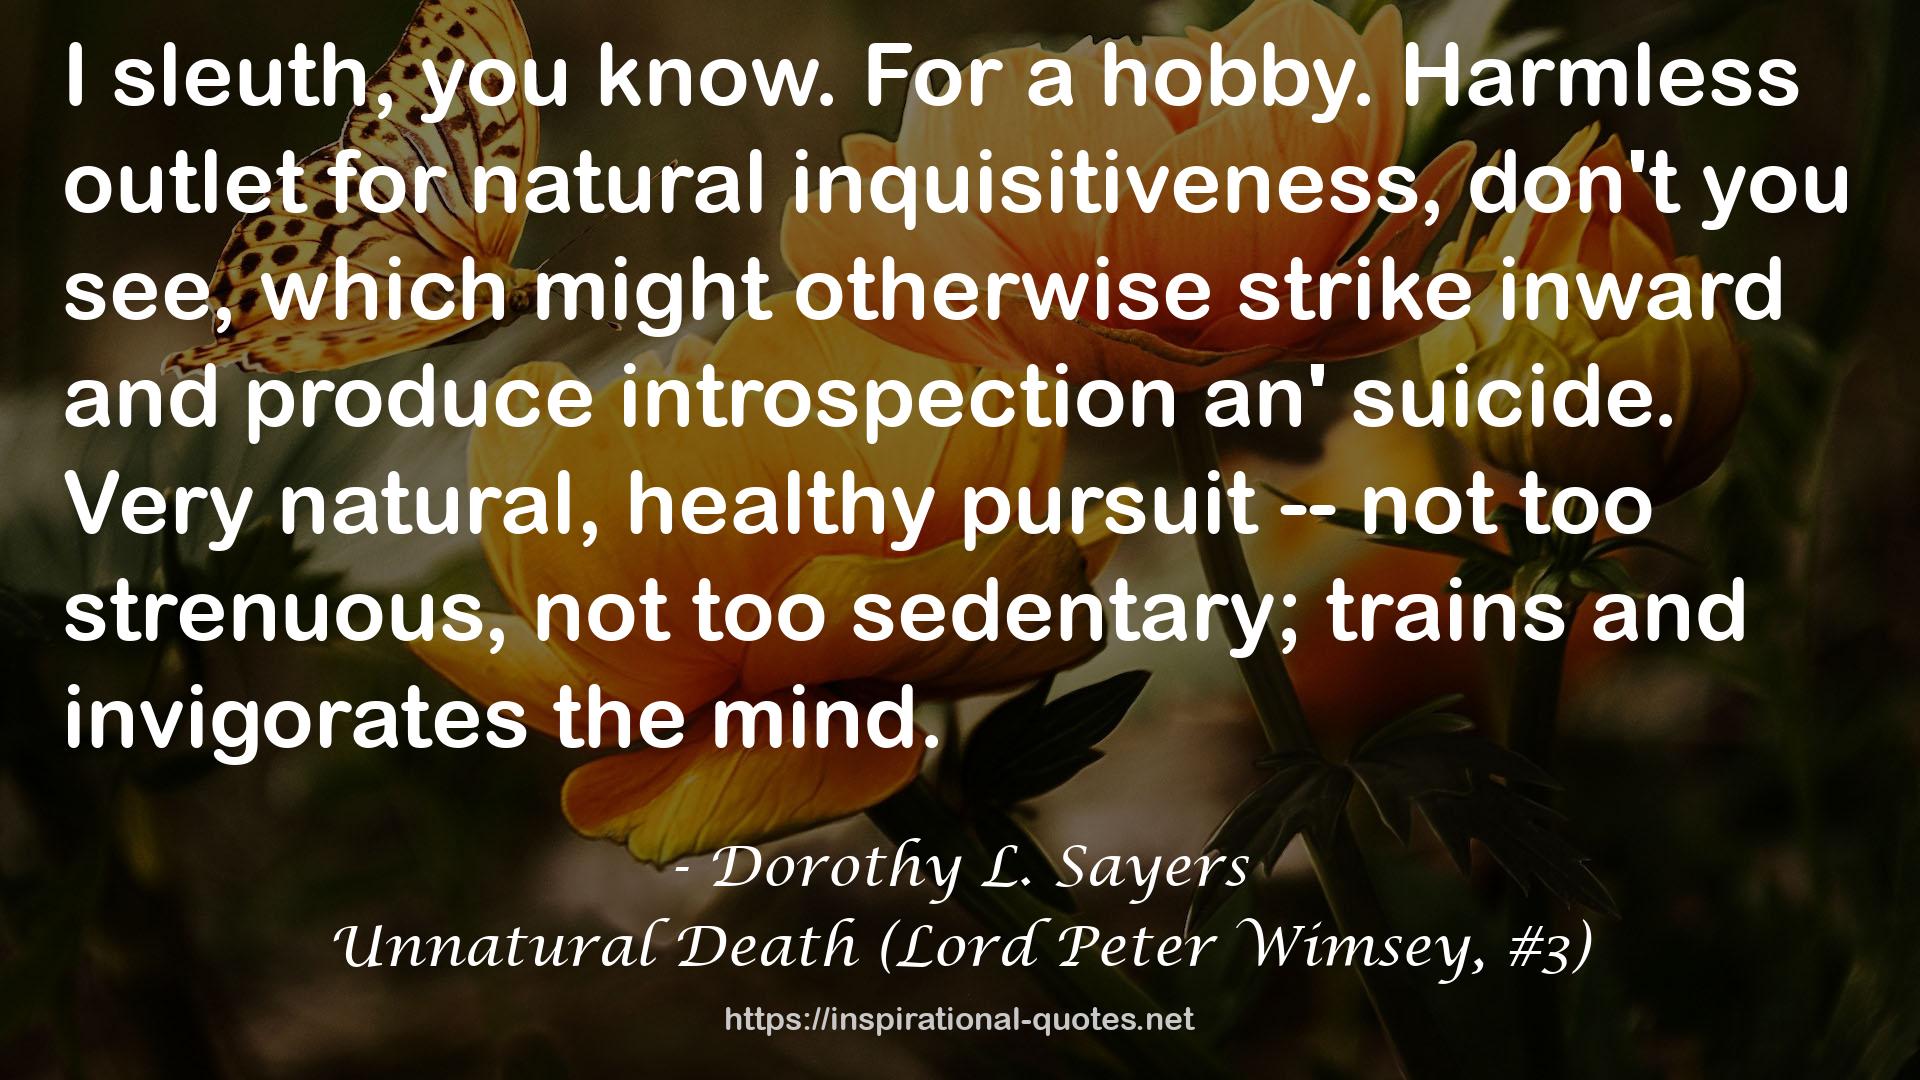 Unnatural Death (Lord Peter Wimsey, #3) QUOTES